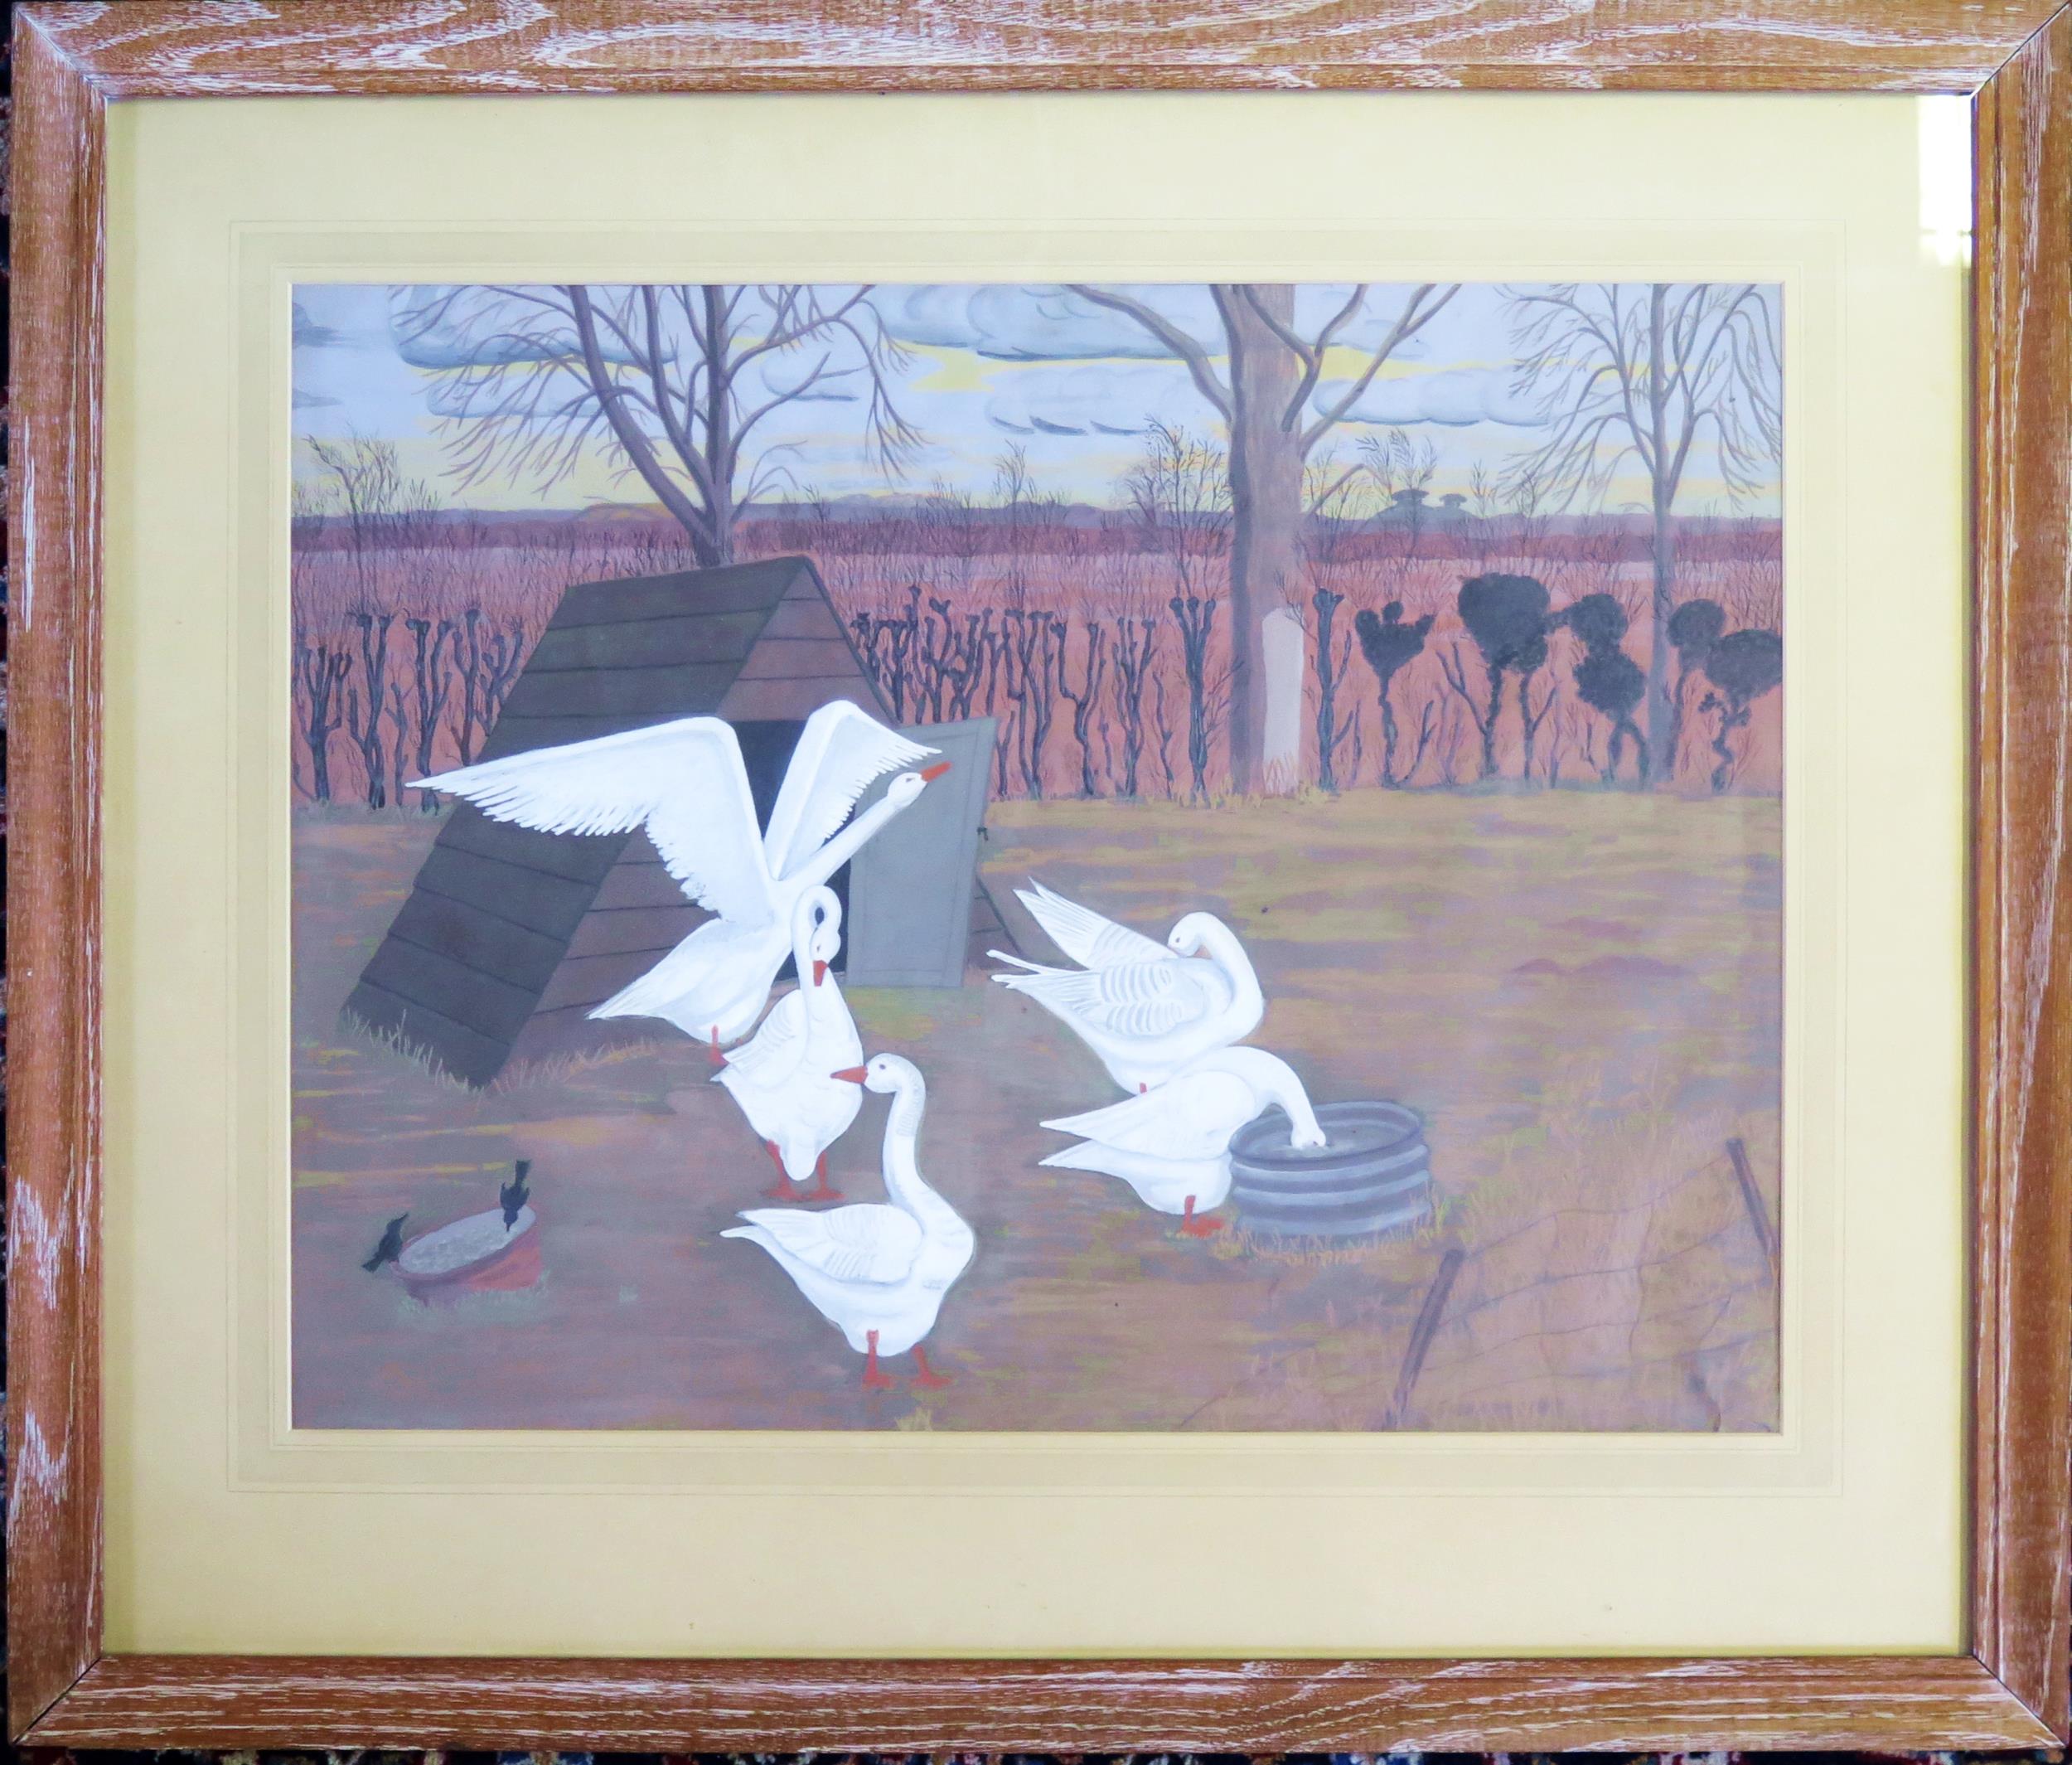 20th century school, Geese feeding in a pen, watercolour, unsigned, undated, 440 x 580cm